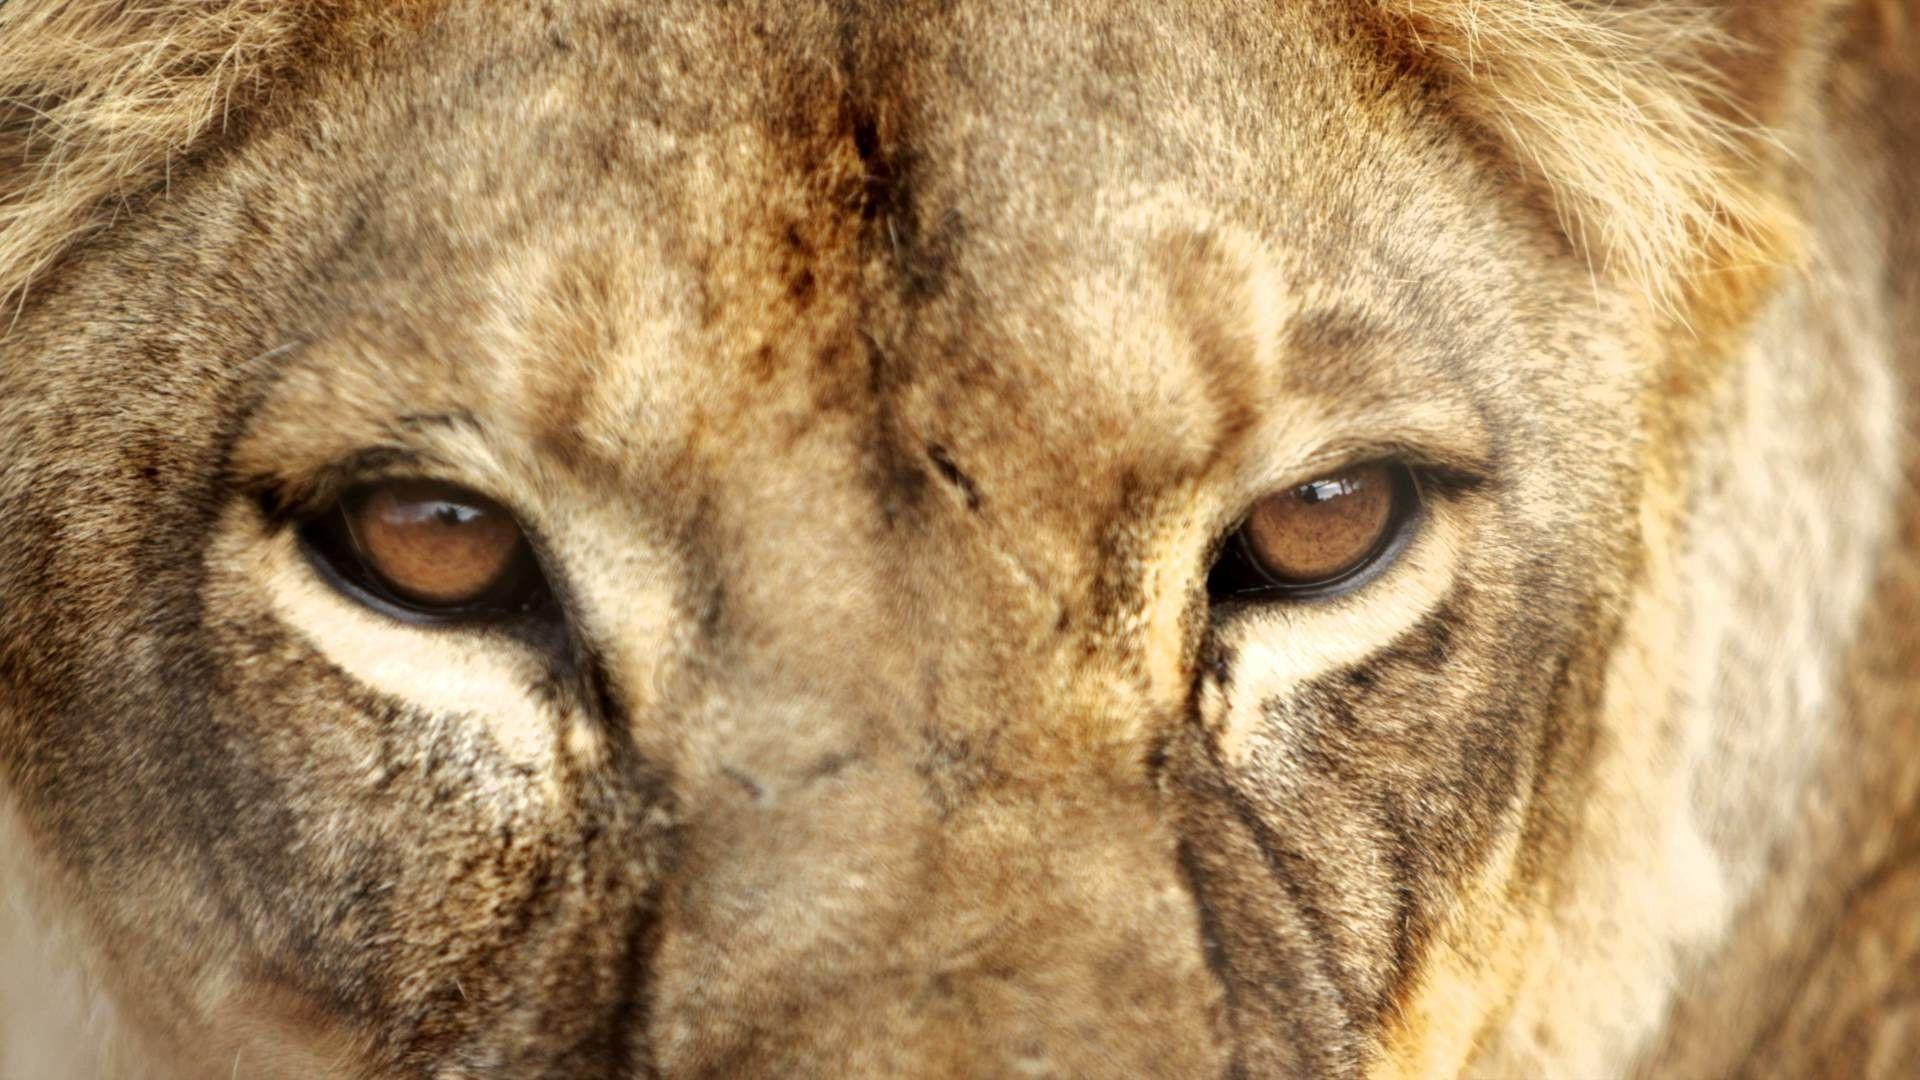 Angry Lion Eyes Wallpaper background picture